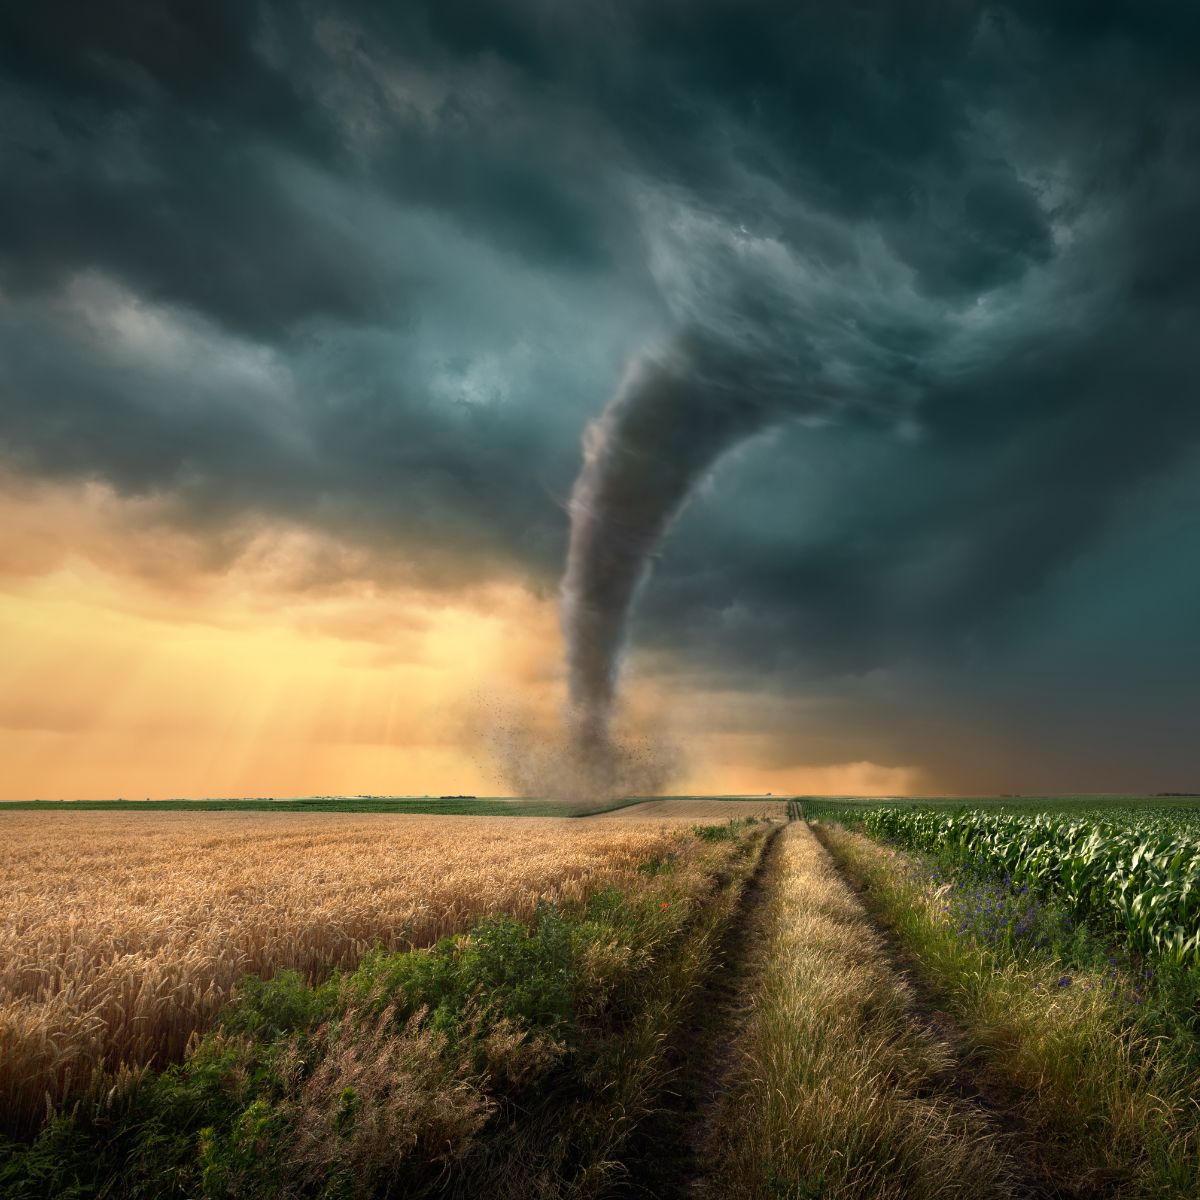 Dreaming of a Tornado spiritual meaning